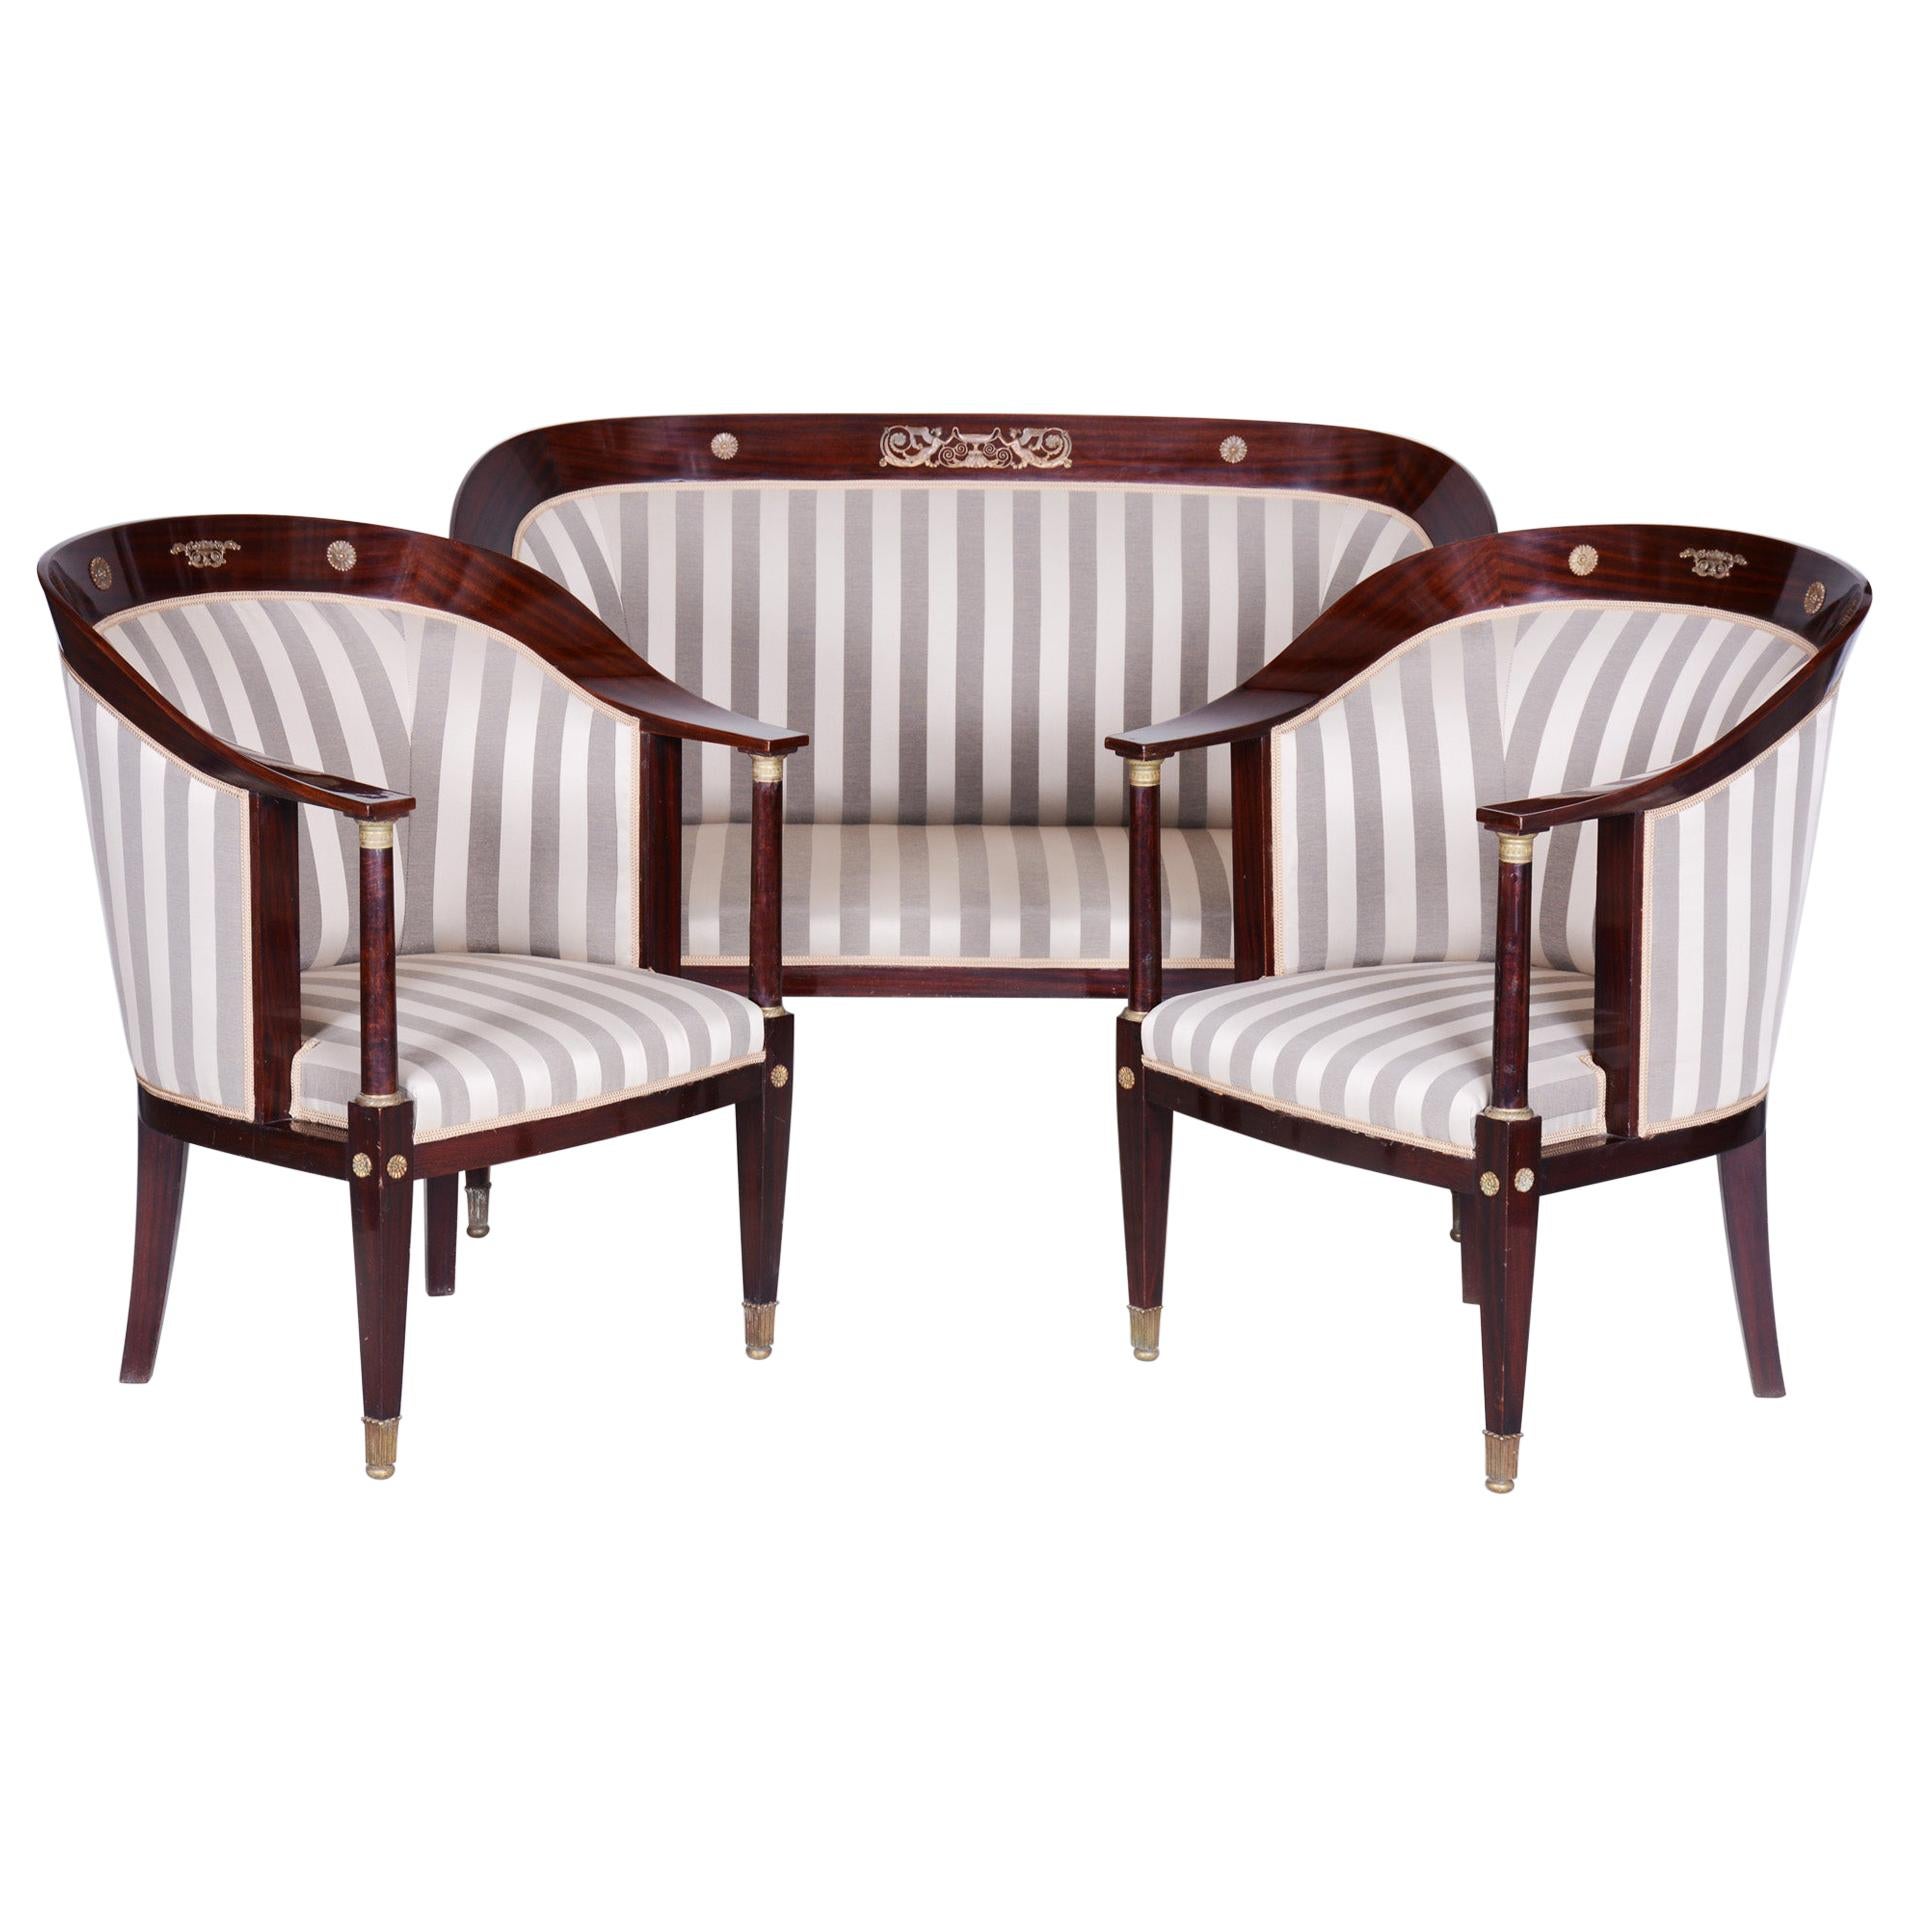 Early 19th Century Restored Empire Mahogany Living Room French Seating Set, 3pcs For Sale